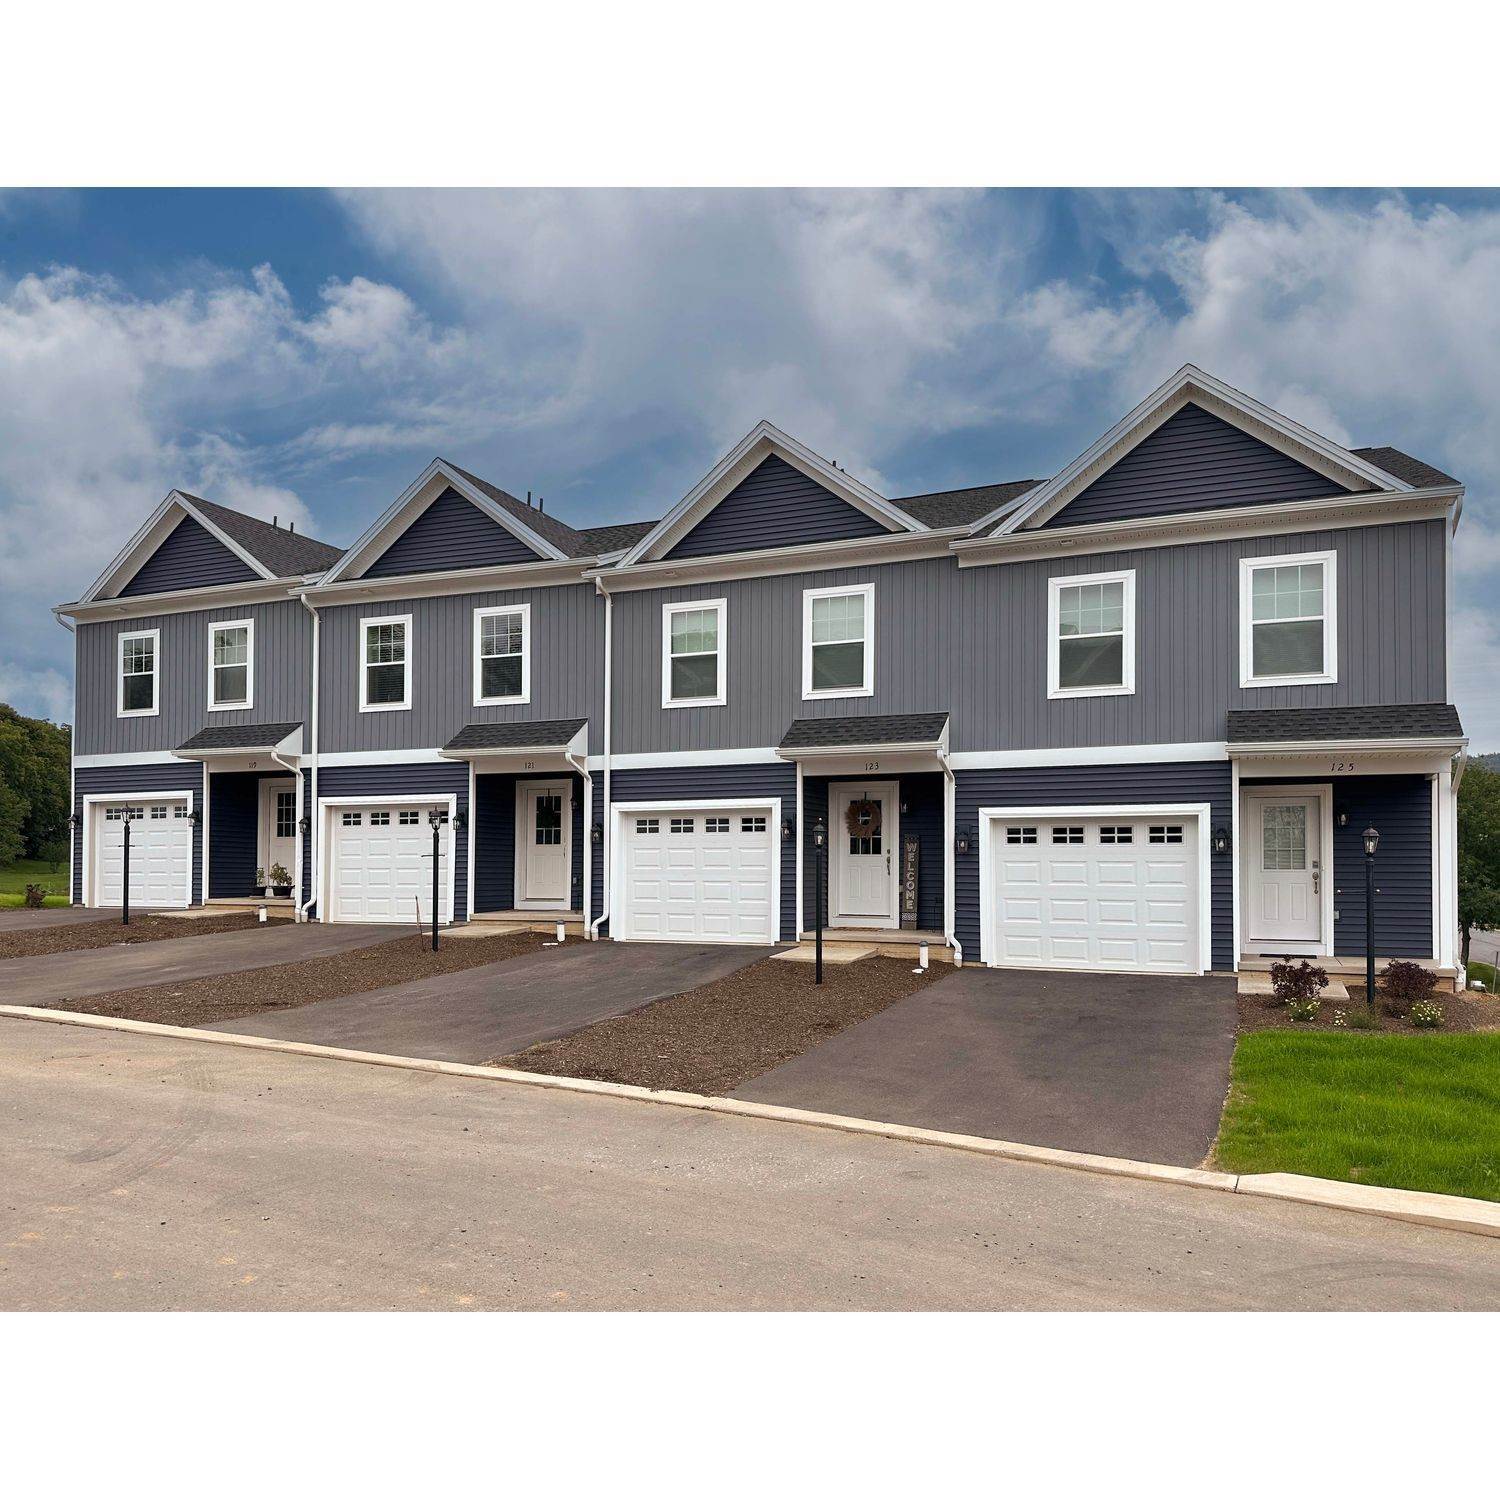 Steeplechase Townhomes Gebäude bei 00 Highpoint Park Drive, Pleasant Gap, PA 16823